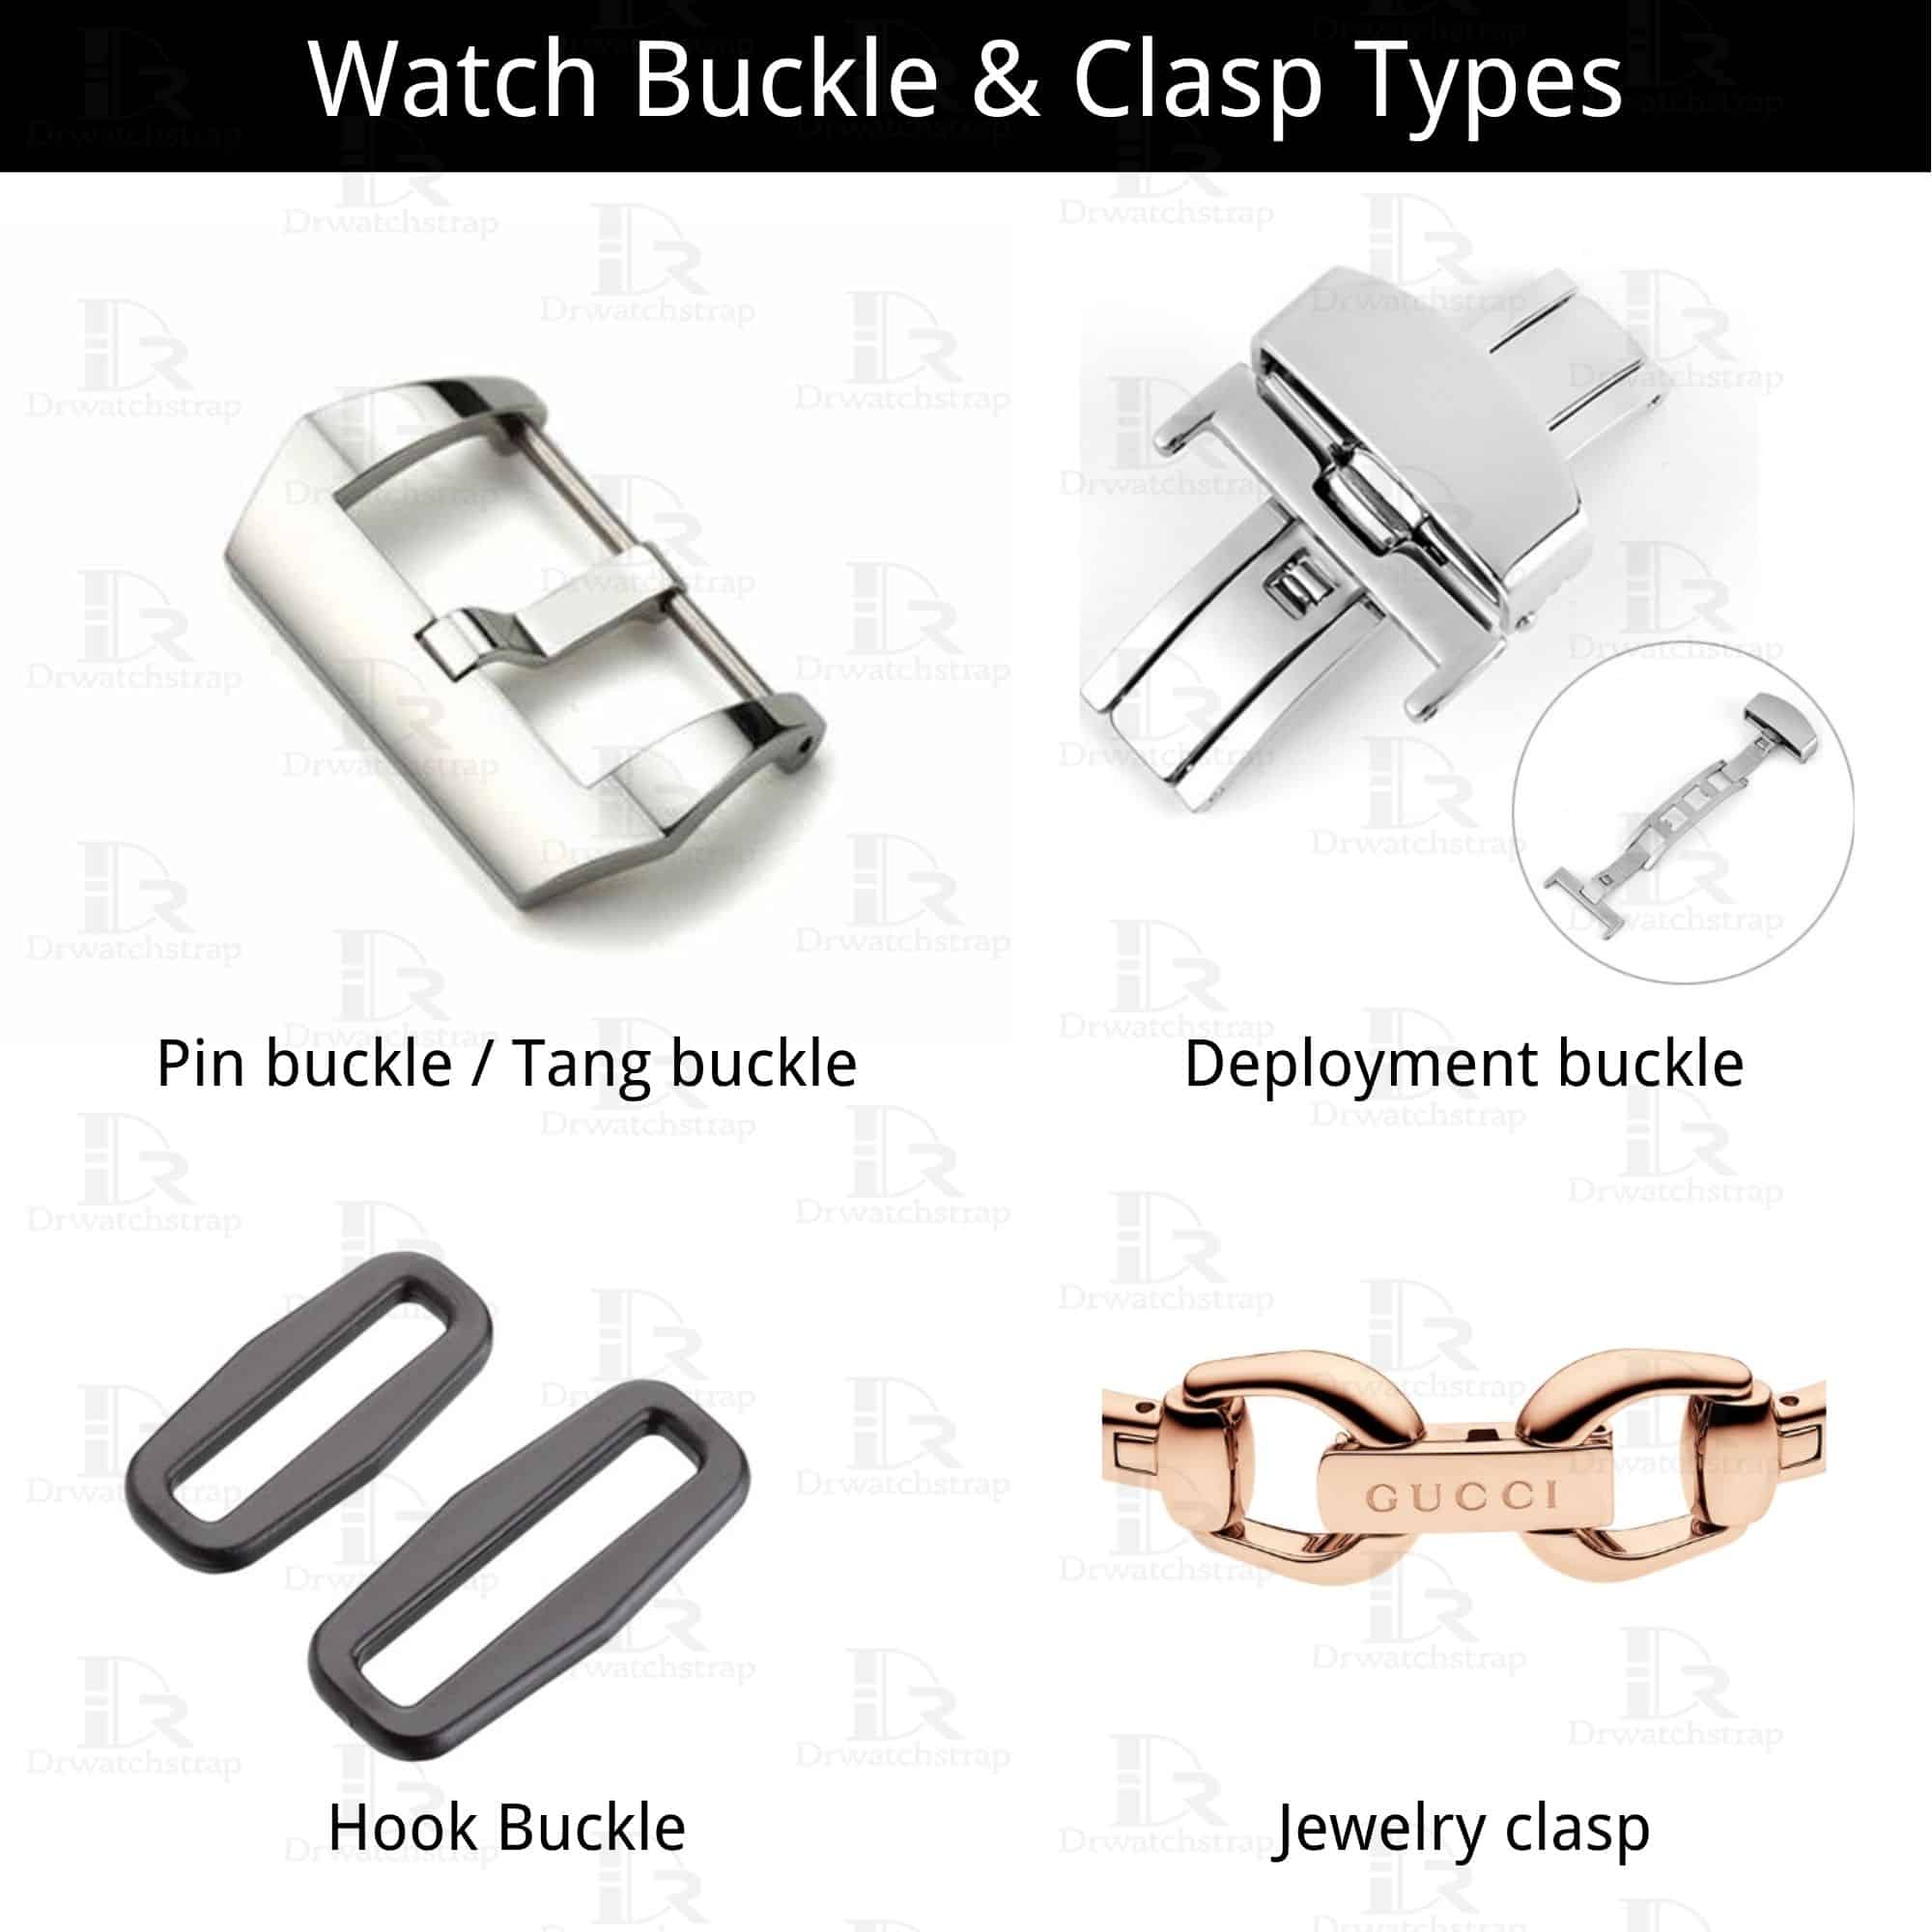 Watch Clasps 101: A Guide to the Various Types of Closures